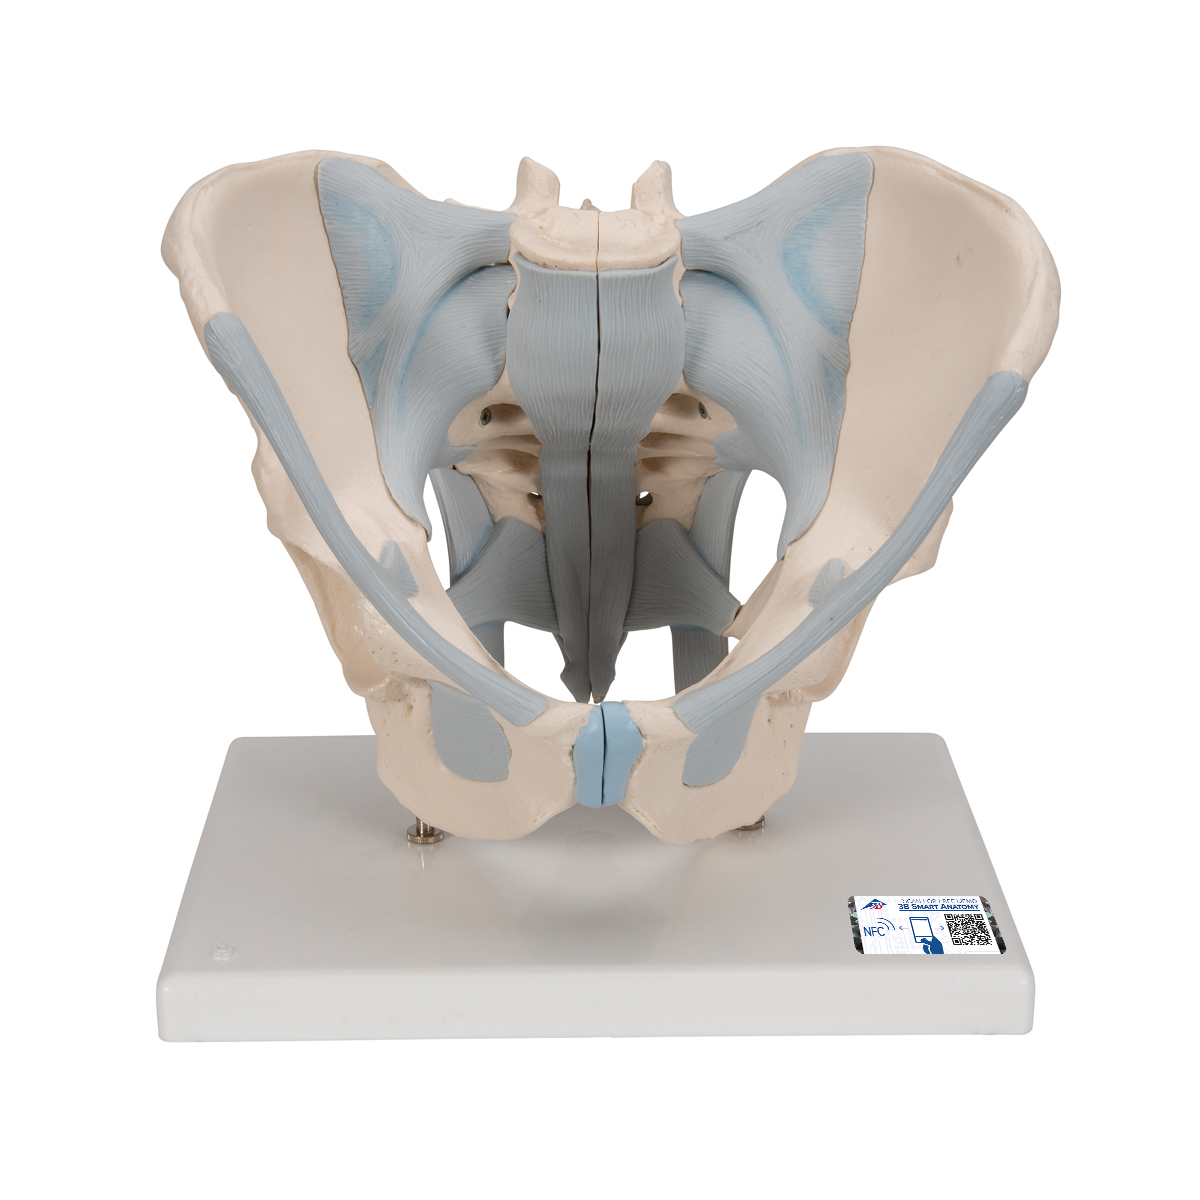 Differences between male pelvis and female pelvis - Online Science Notes